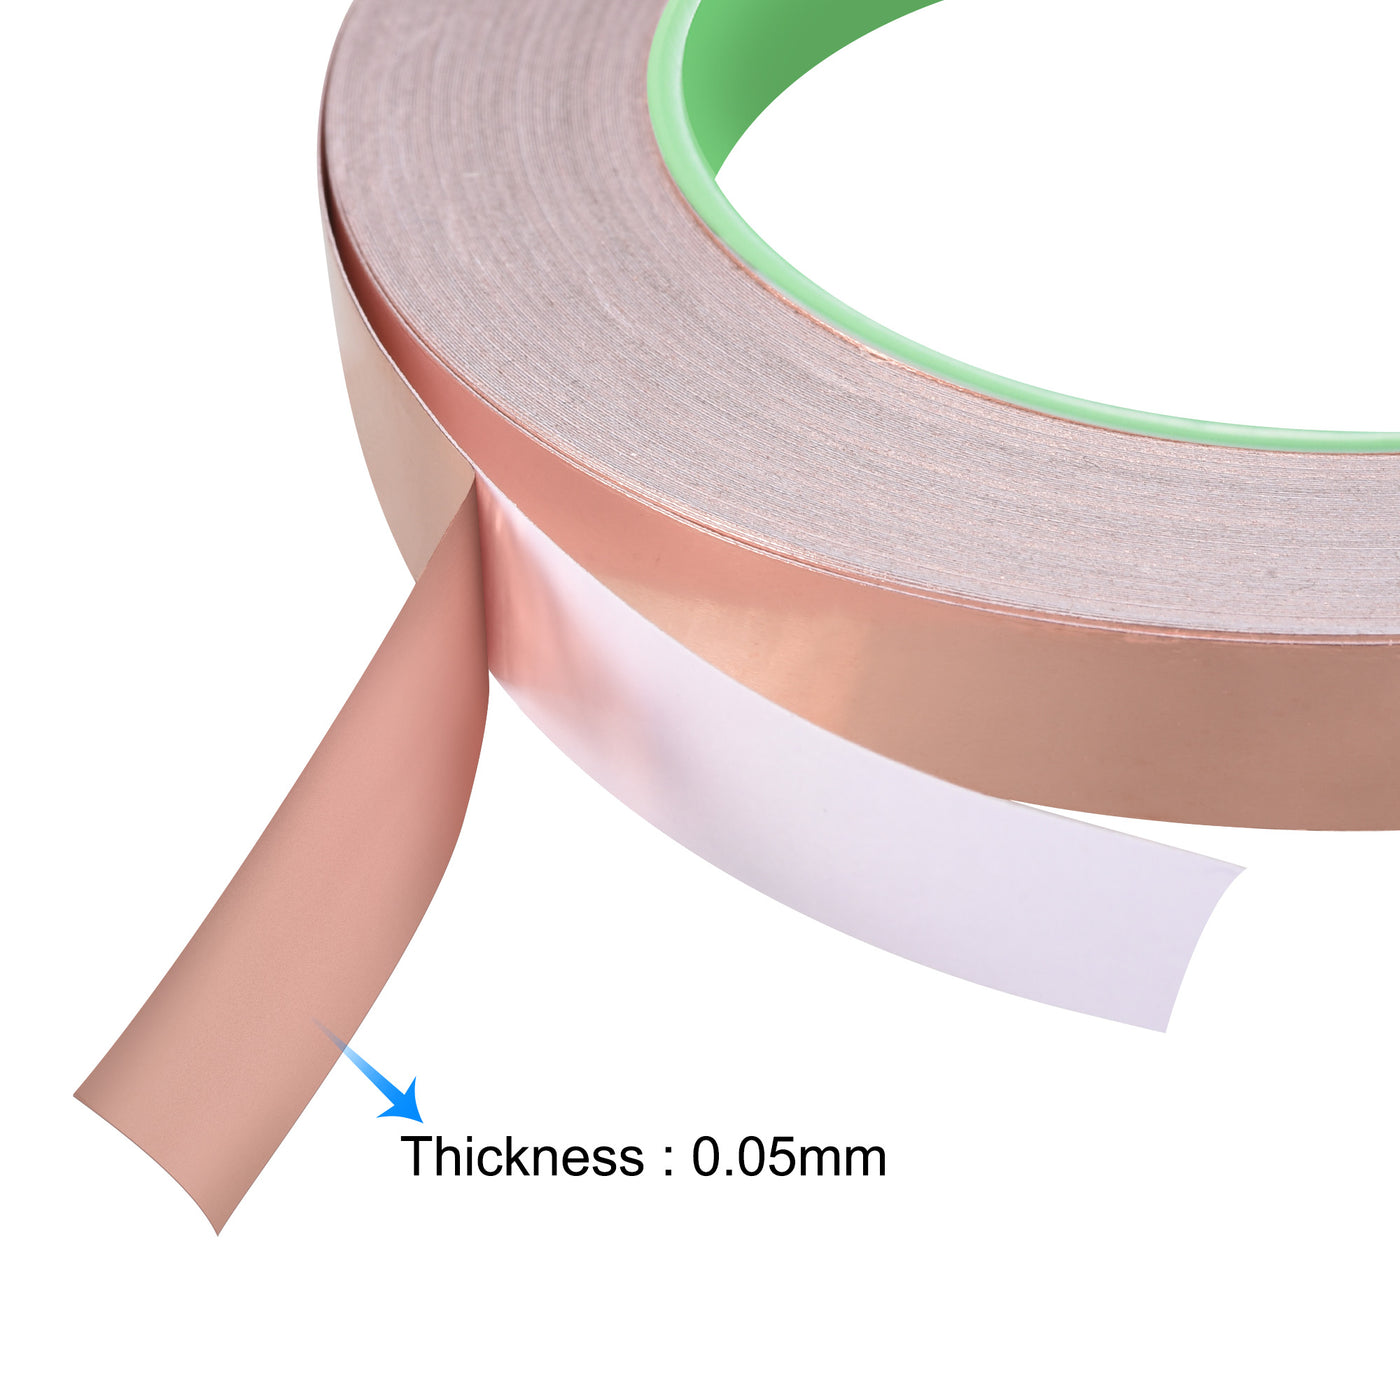 uxcell Uxcell Double-Sided Conductive Tape Copper Foil Tape 4mm x 30m/98.4ft 1pcs